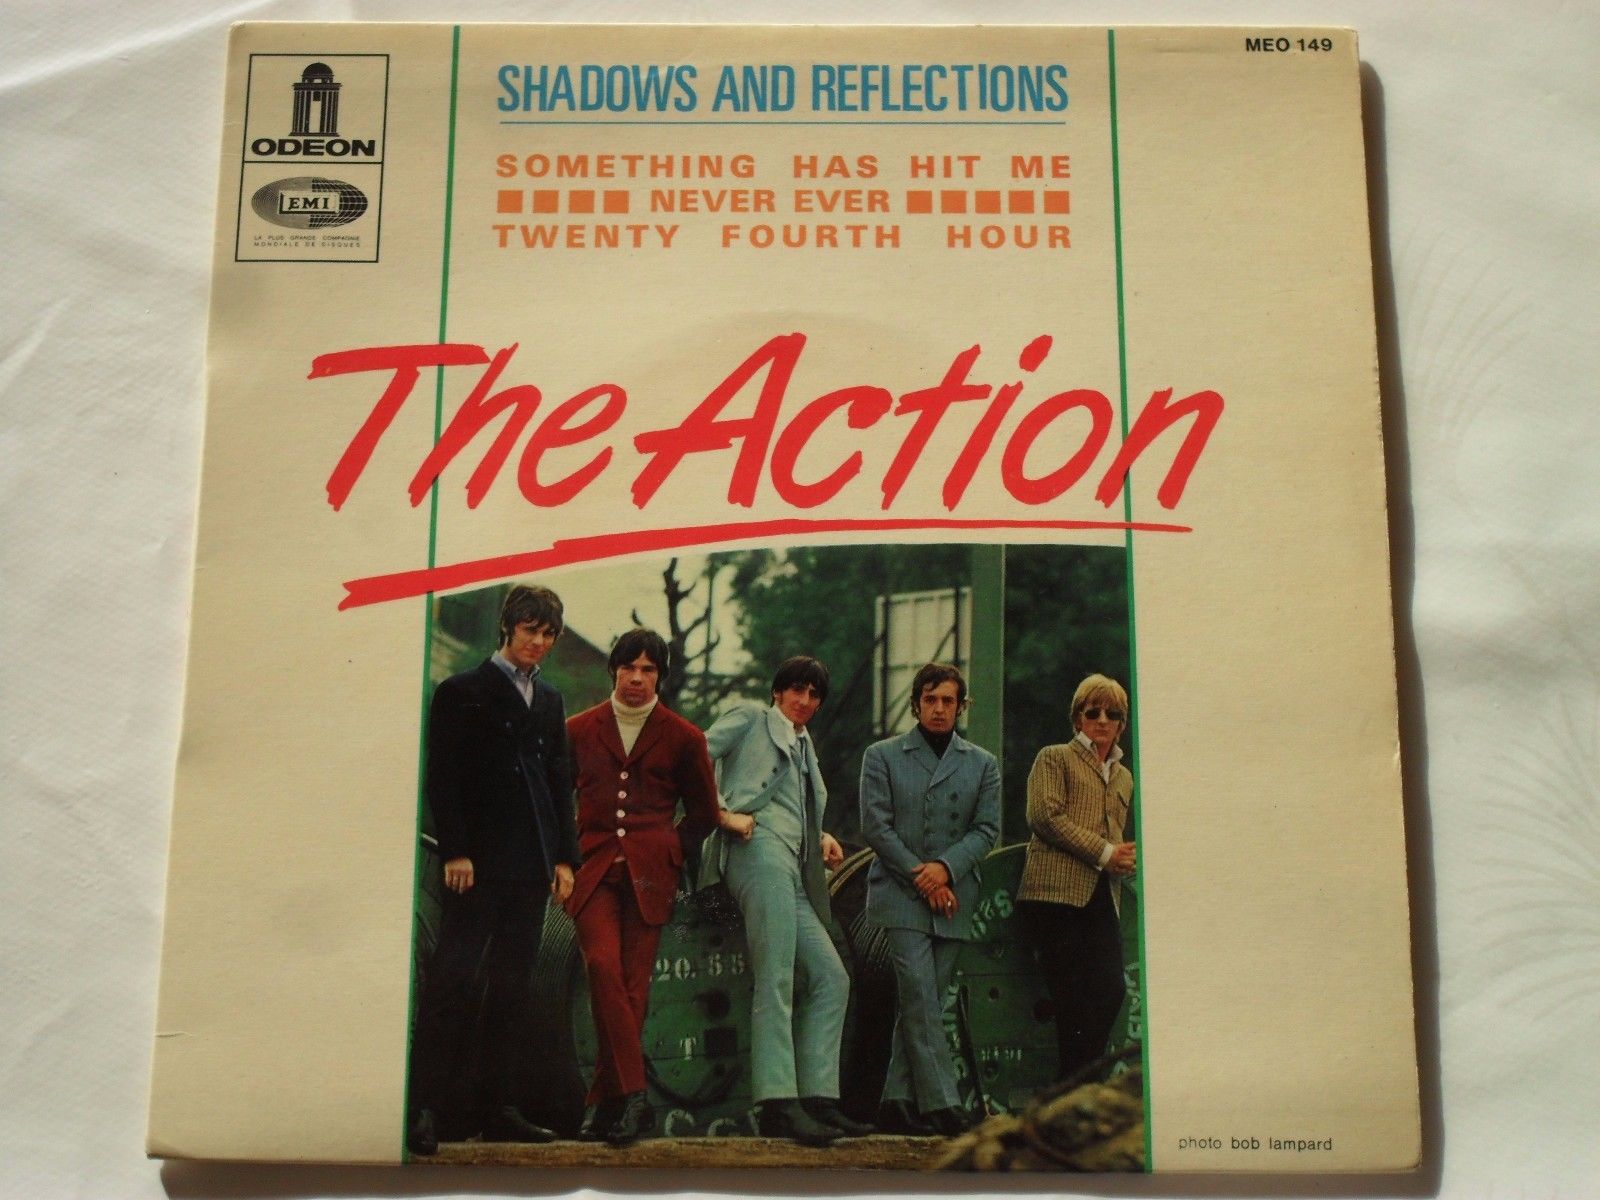 FRENCH EP THE ACTION/ODEON MEO 149/SHADOWS AND REFLECTION/MOD/PSYCH